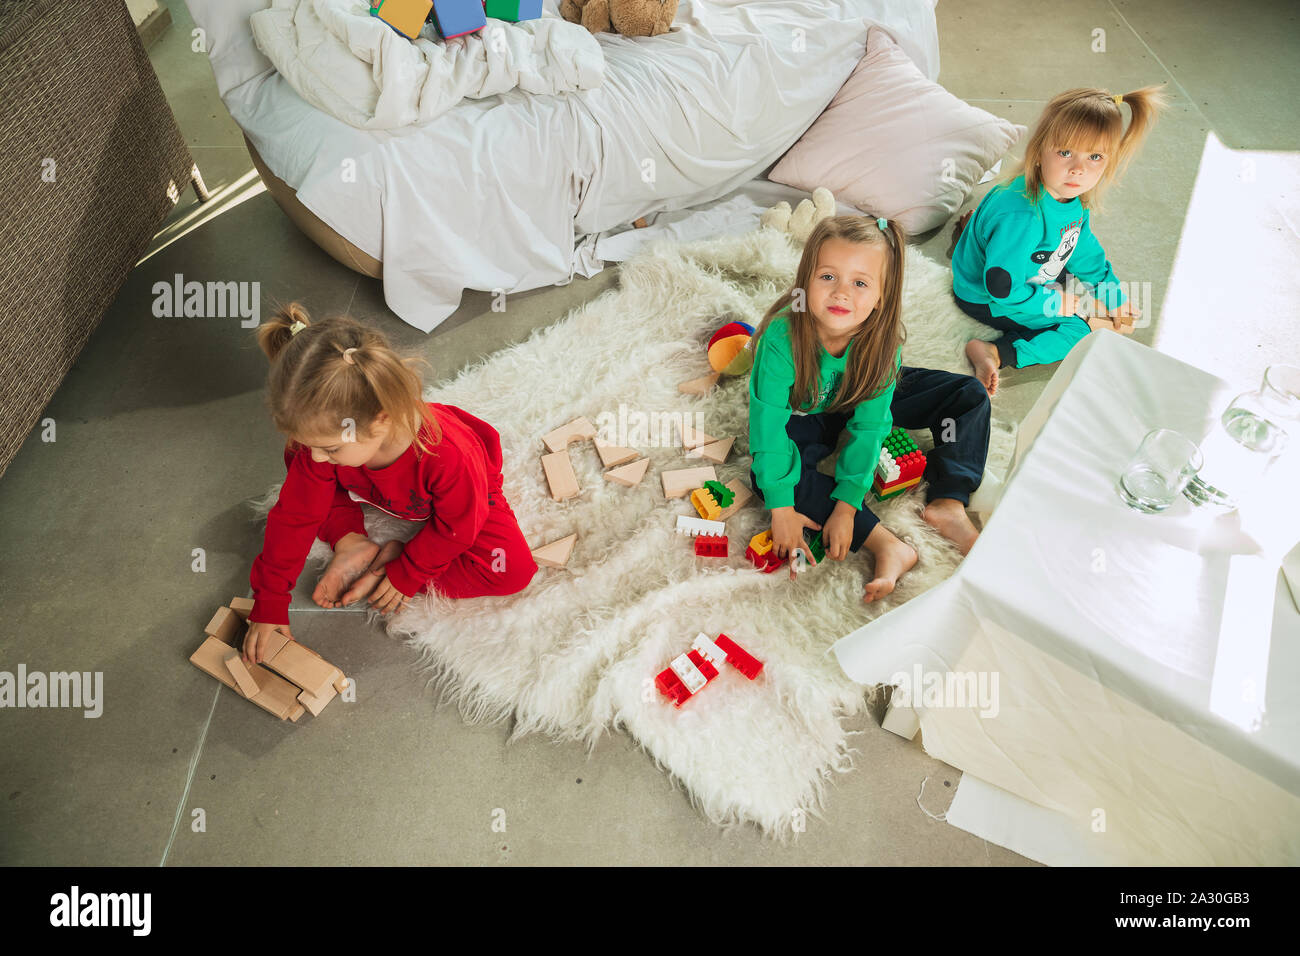 Little girls in soft warm pajamas playing at home. Caucasian children in colorful clothes having fun together. Childhood, home comfort, happiness. Sitting on the floor and making constructor. Stock Photo